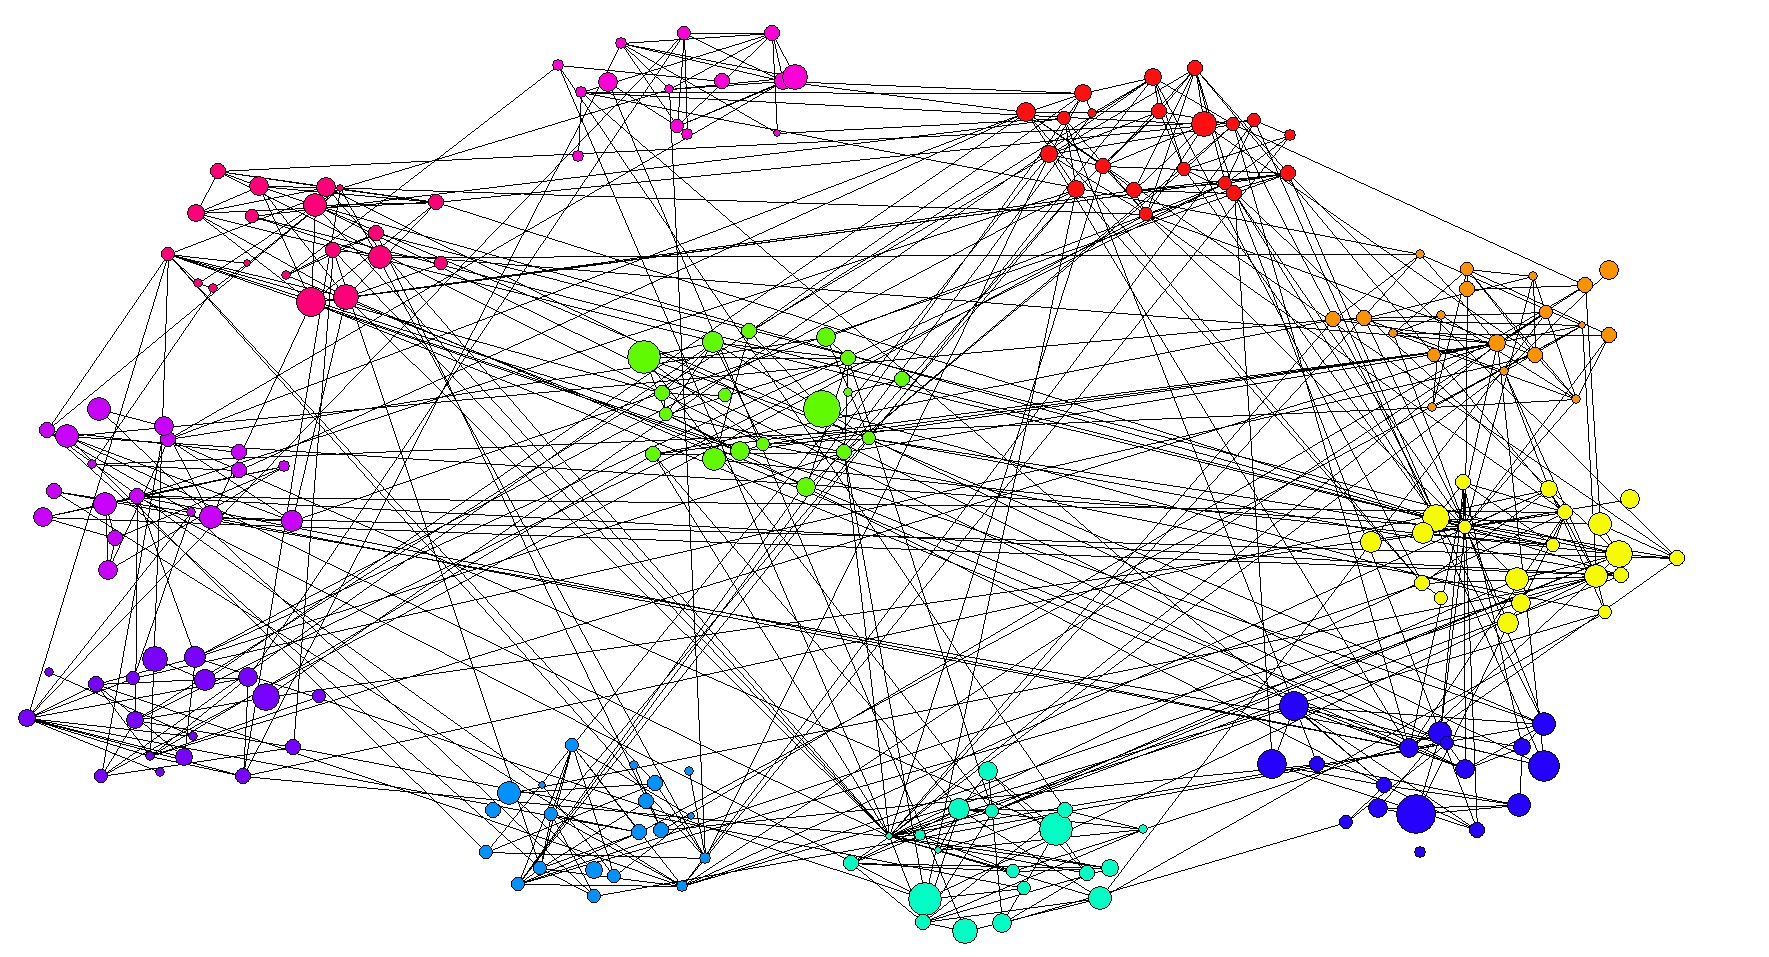 The Social Networks of Drinking, Dating, and Dysfunction